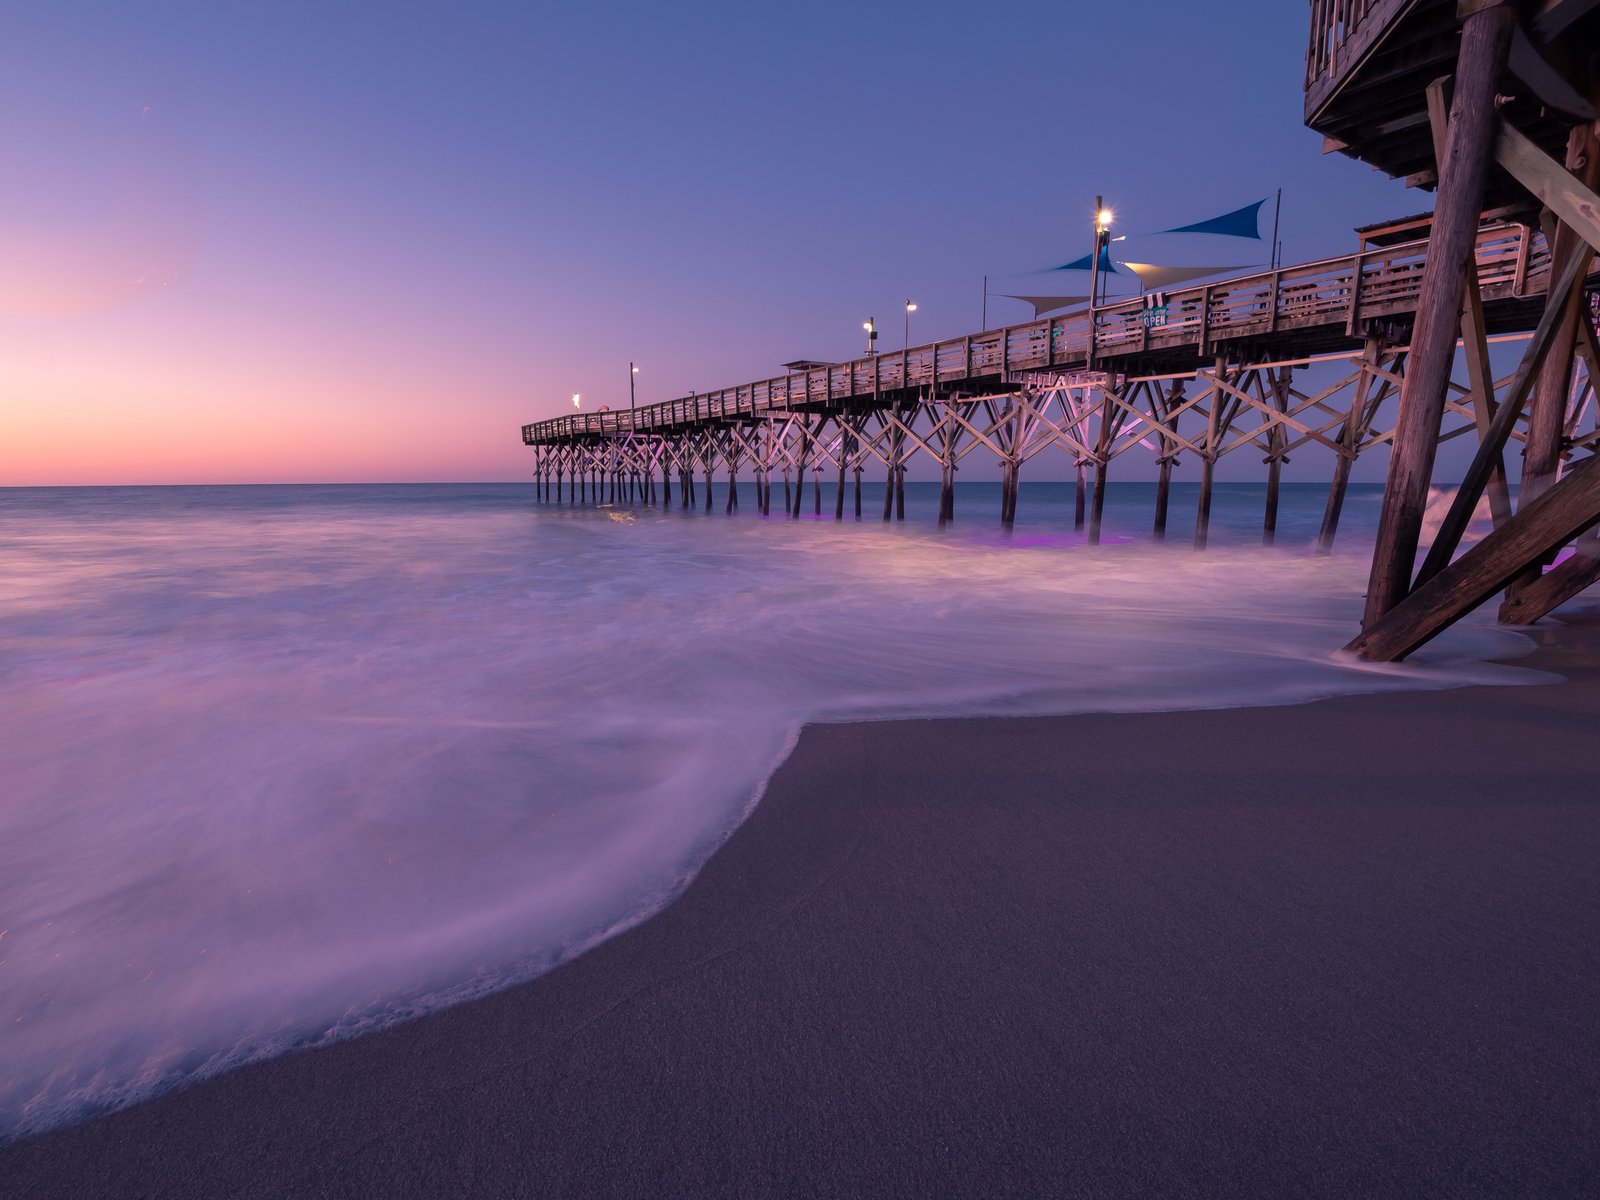 Pretty night view with a purple sky with the sun setting over the pier during the least busy time to visit Myrtle Beach